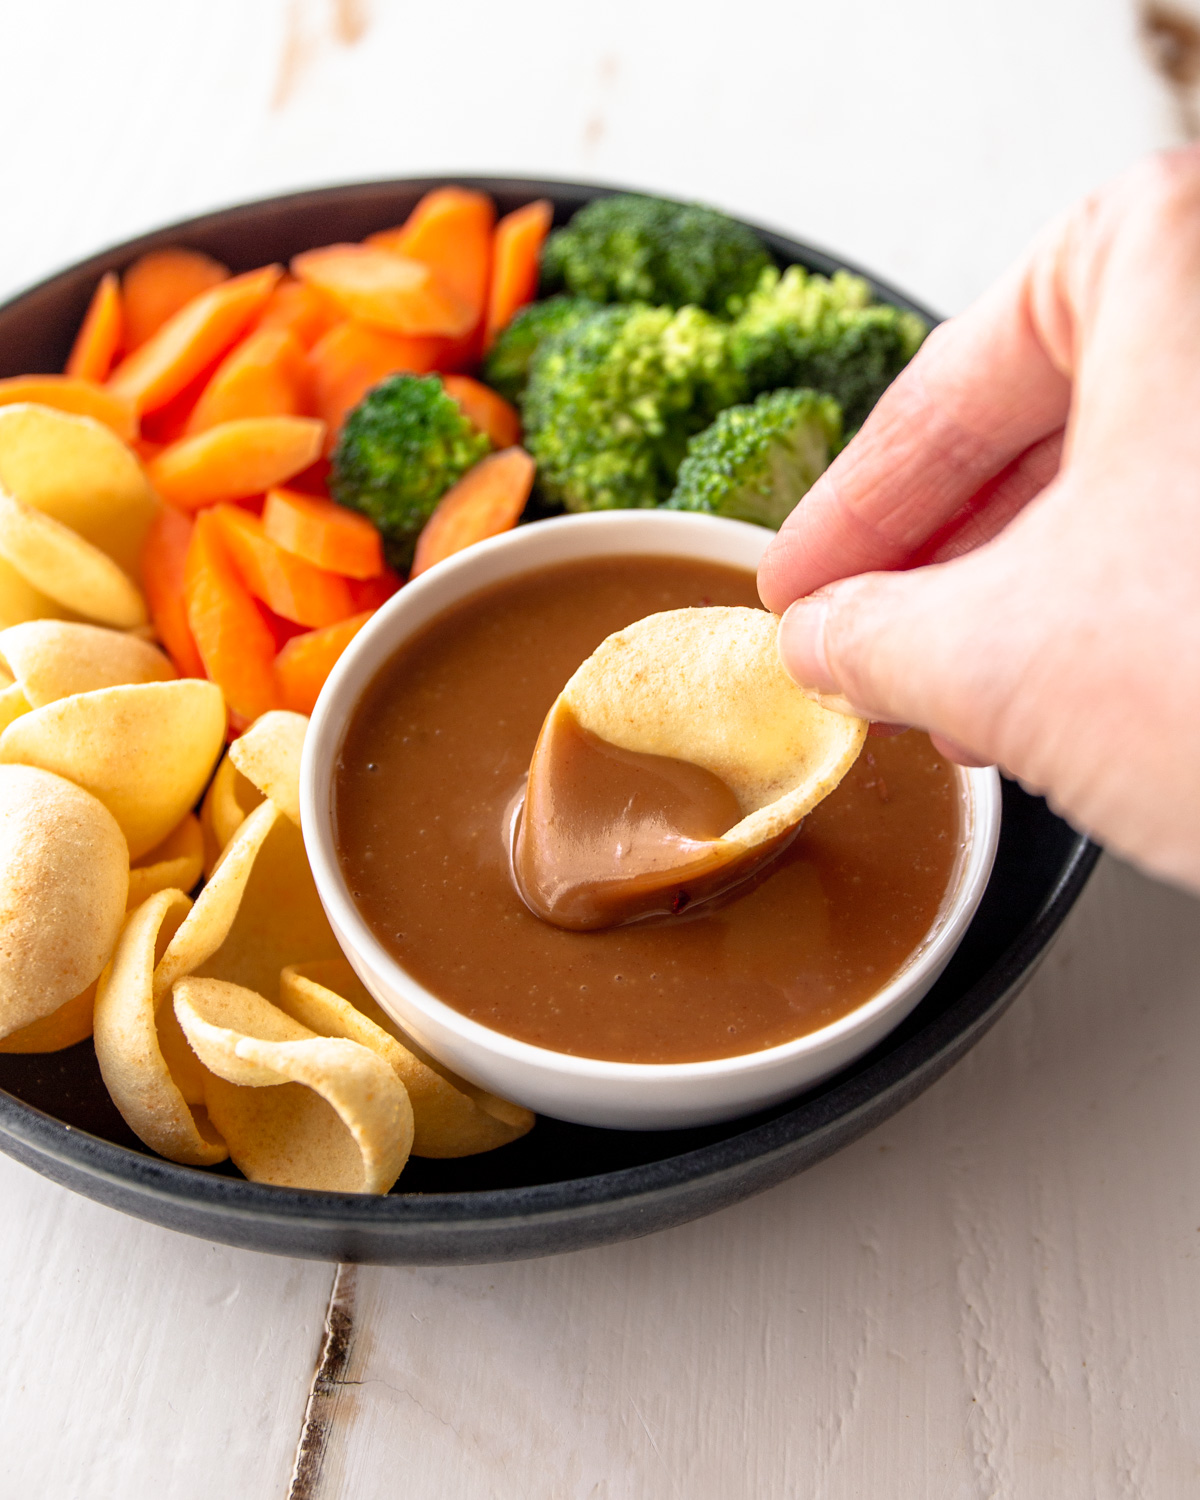 dipping a chip into peanut sauce in a white bowl